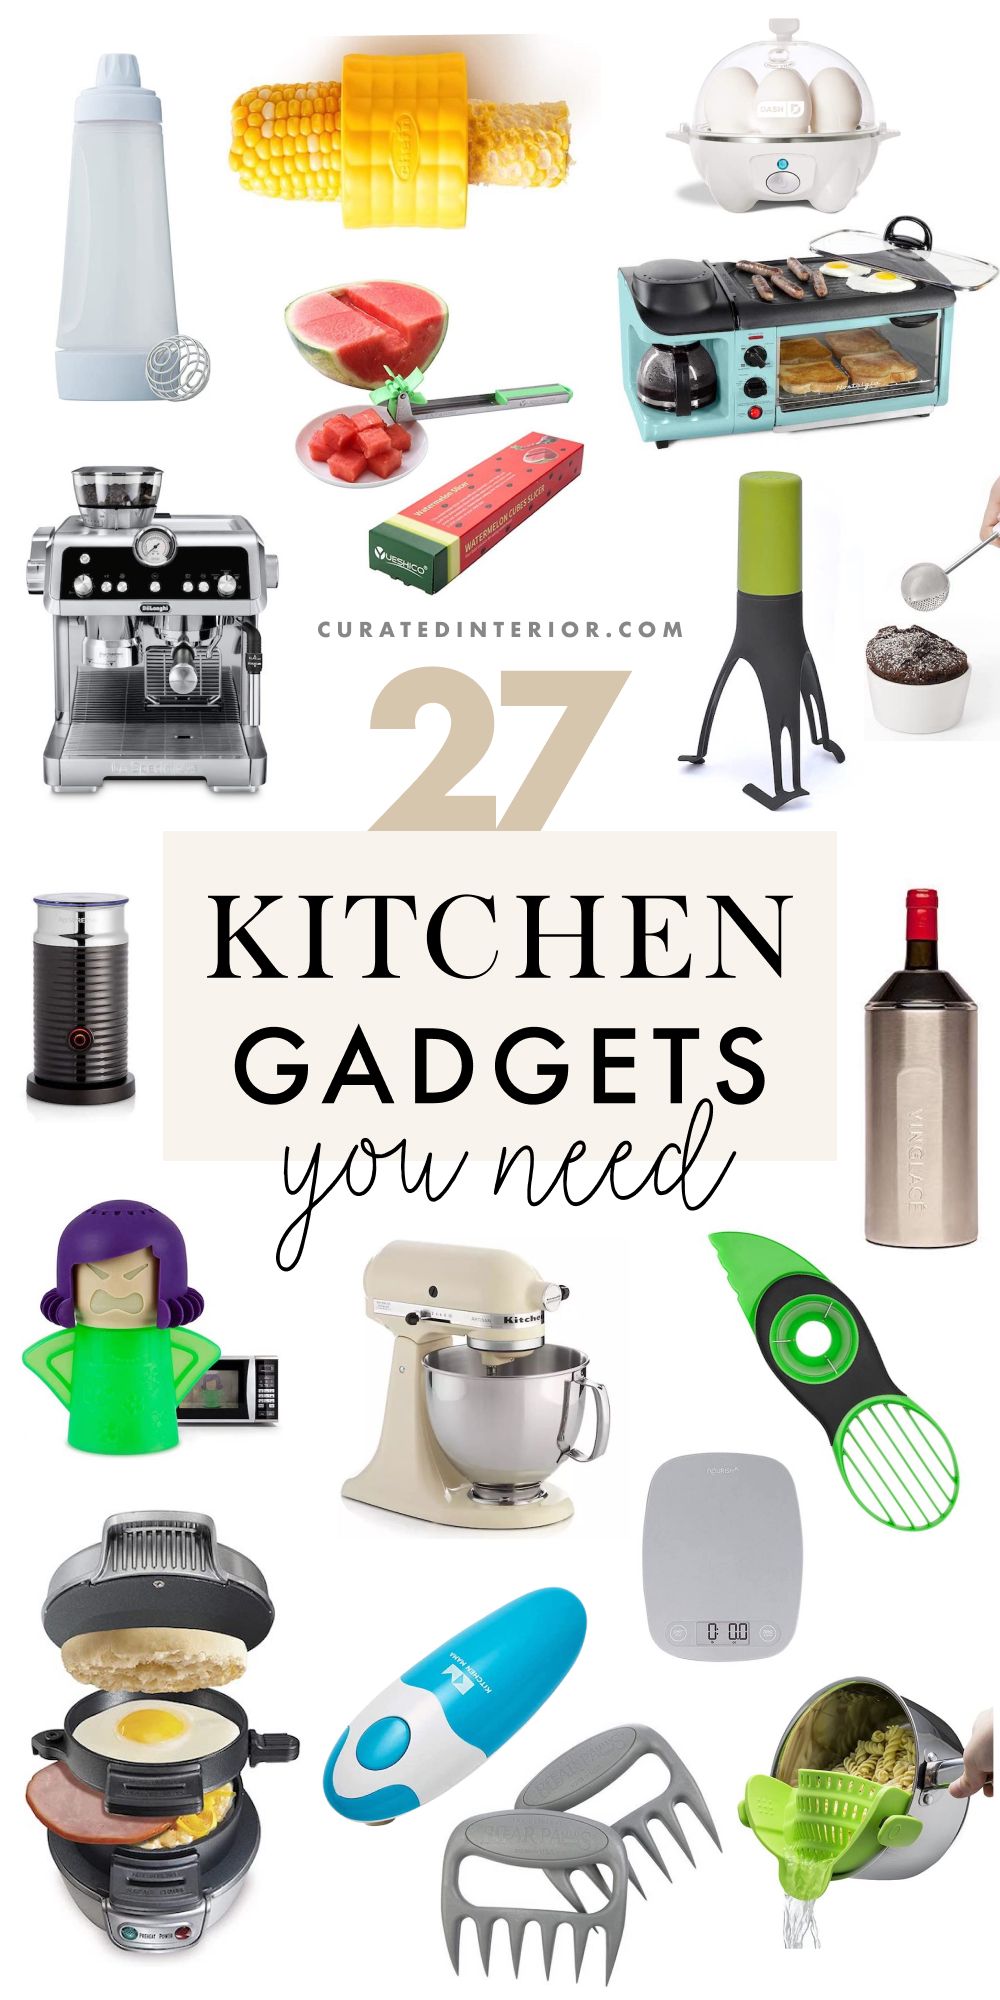 27 Kitchen Gadgets you need